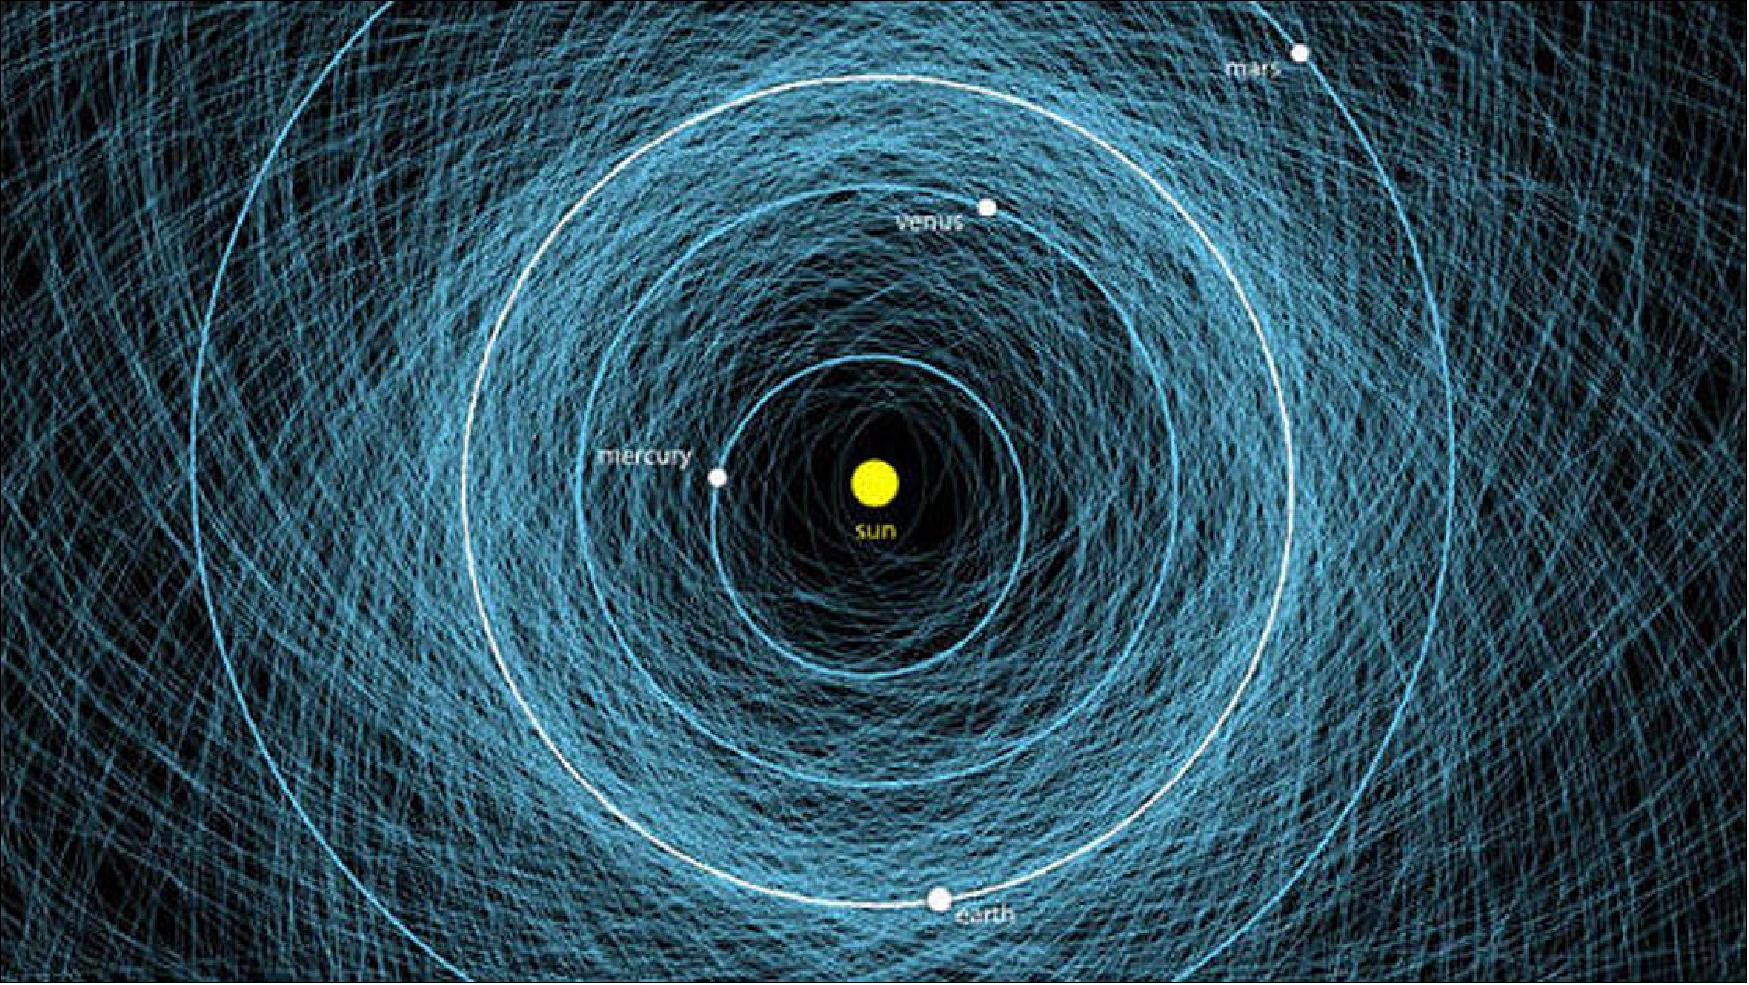 Figure 52: A visualization of some of the asteroids in our solar system, created by NASA asteroid researcher Paul Chodas (image credit: NASA, Paul Chodas)